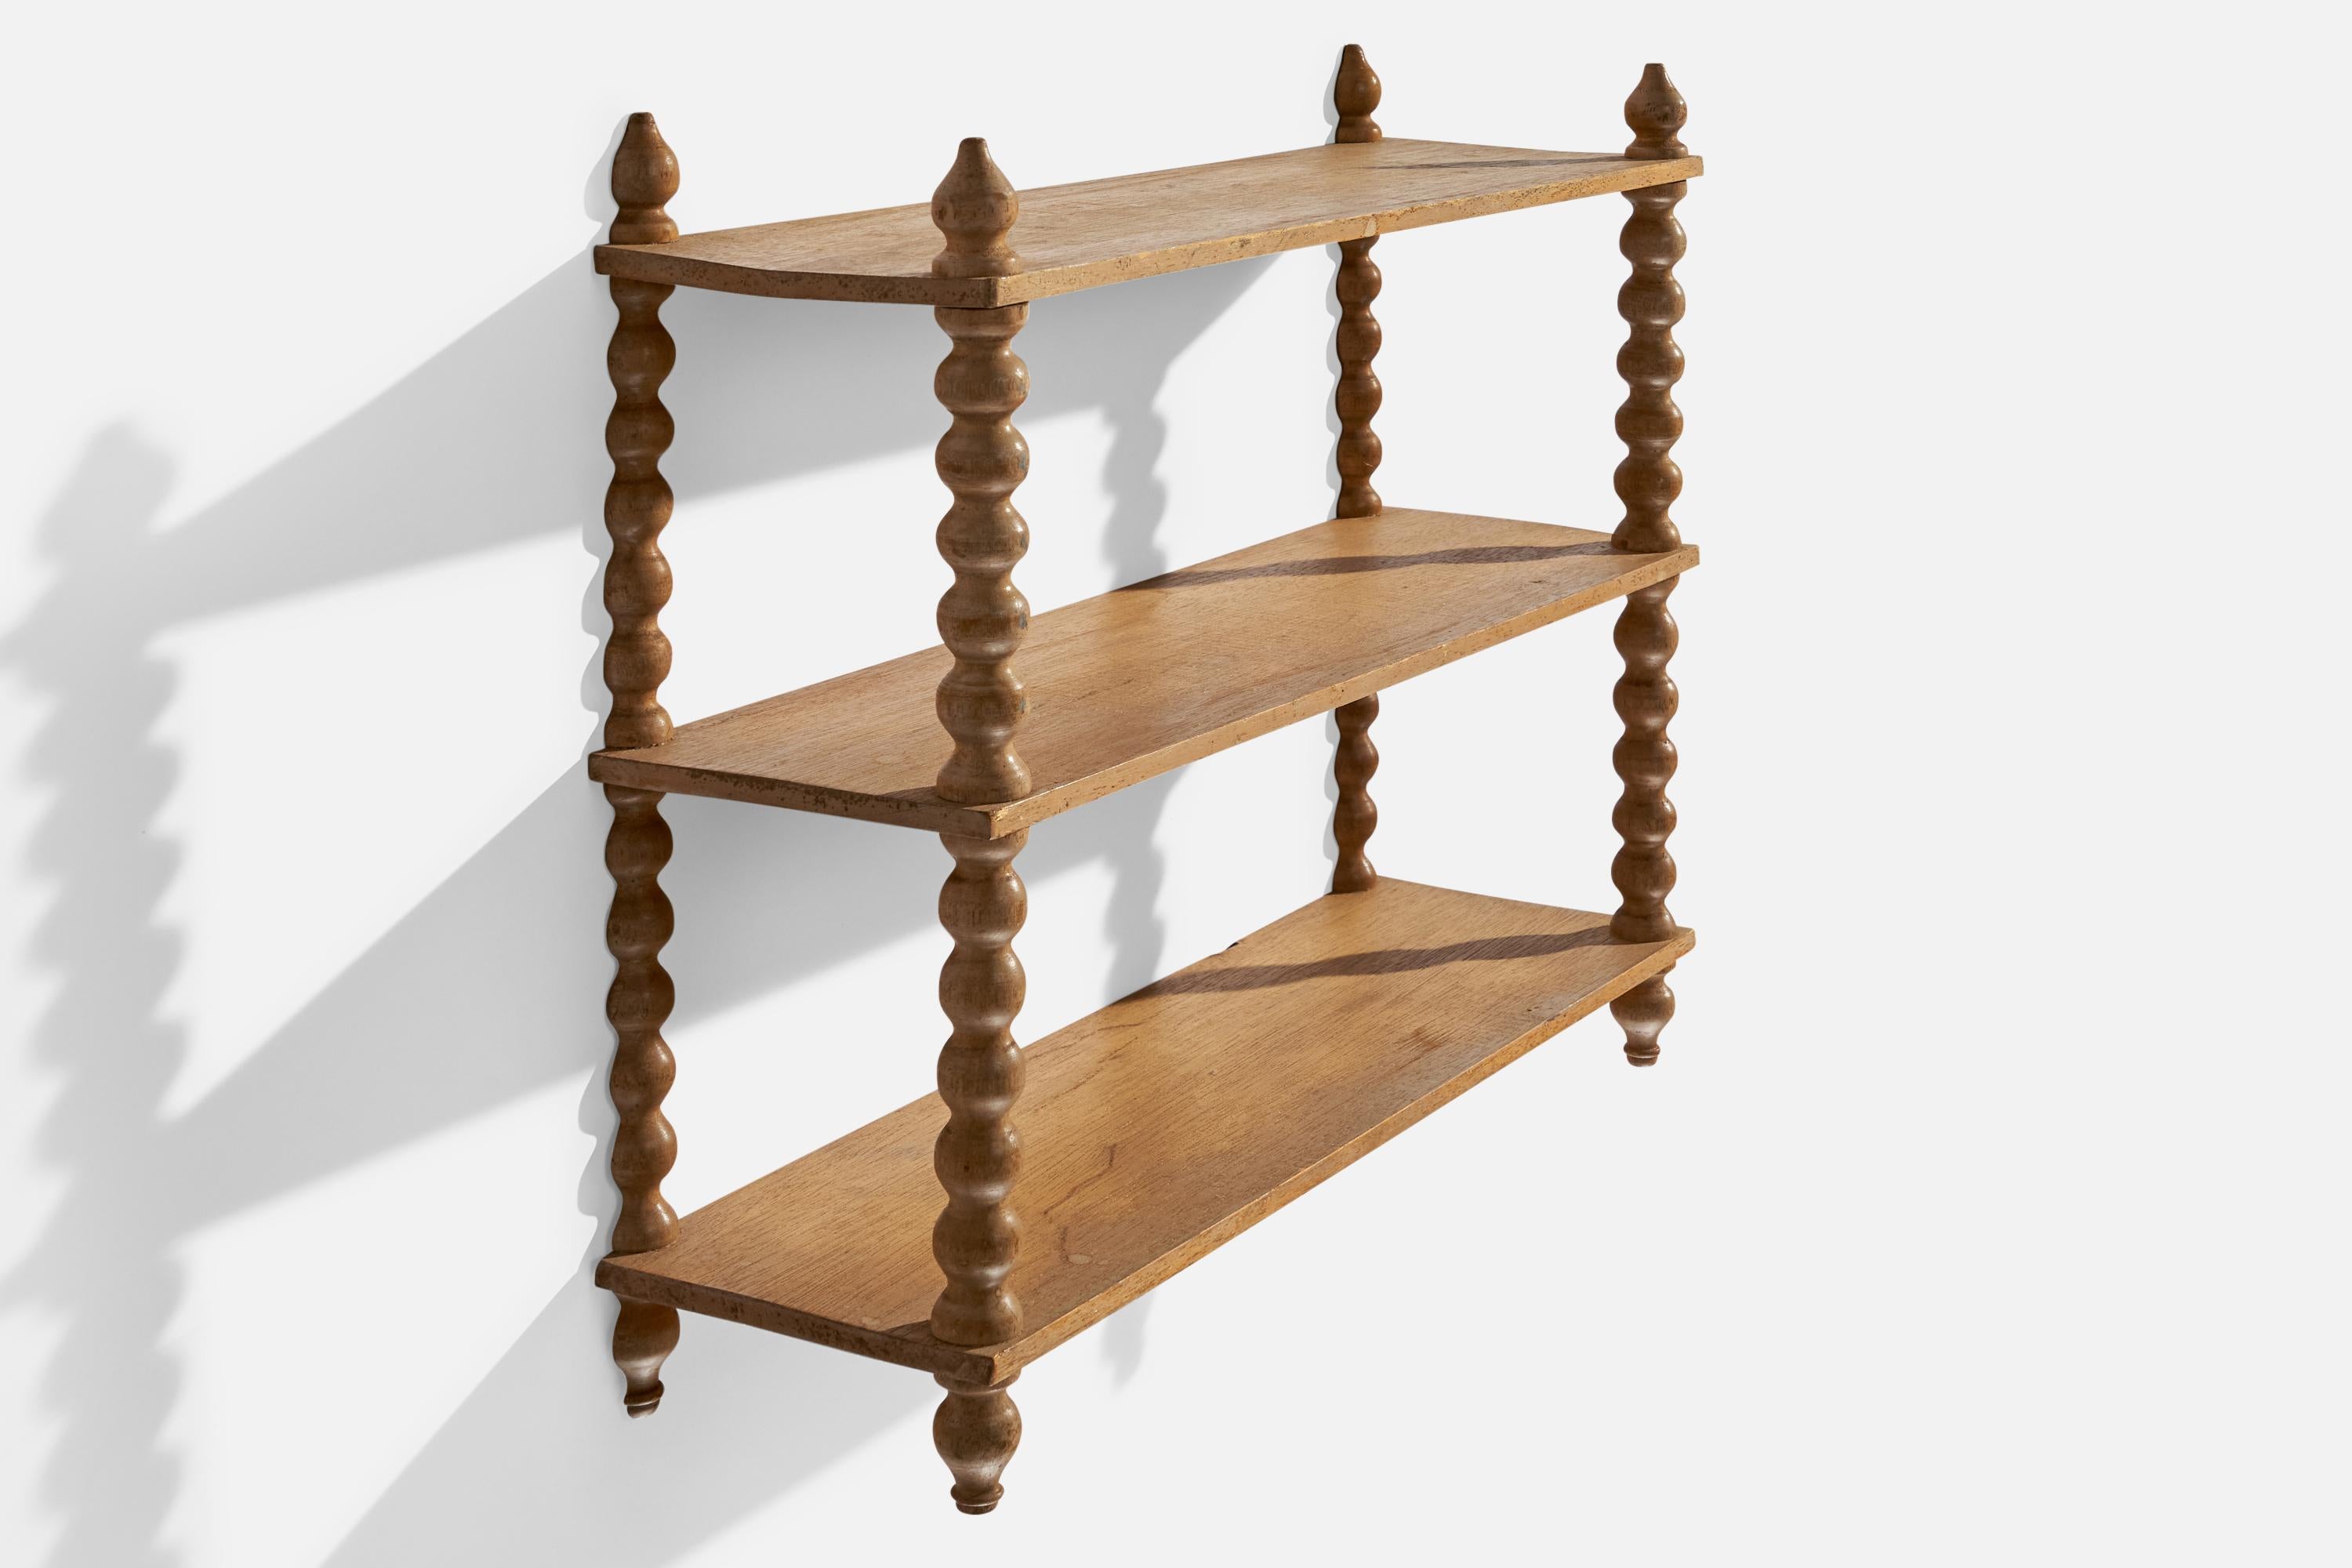 A wall mounted oak shelf designed and produced in Sweden, c. 1920s.